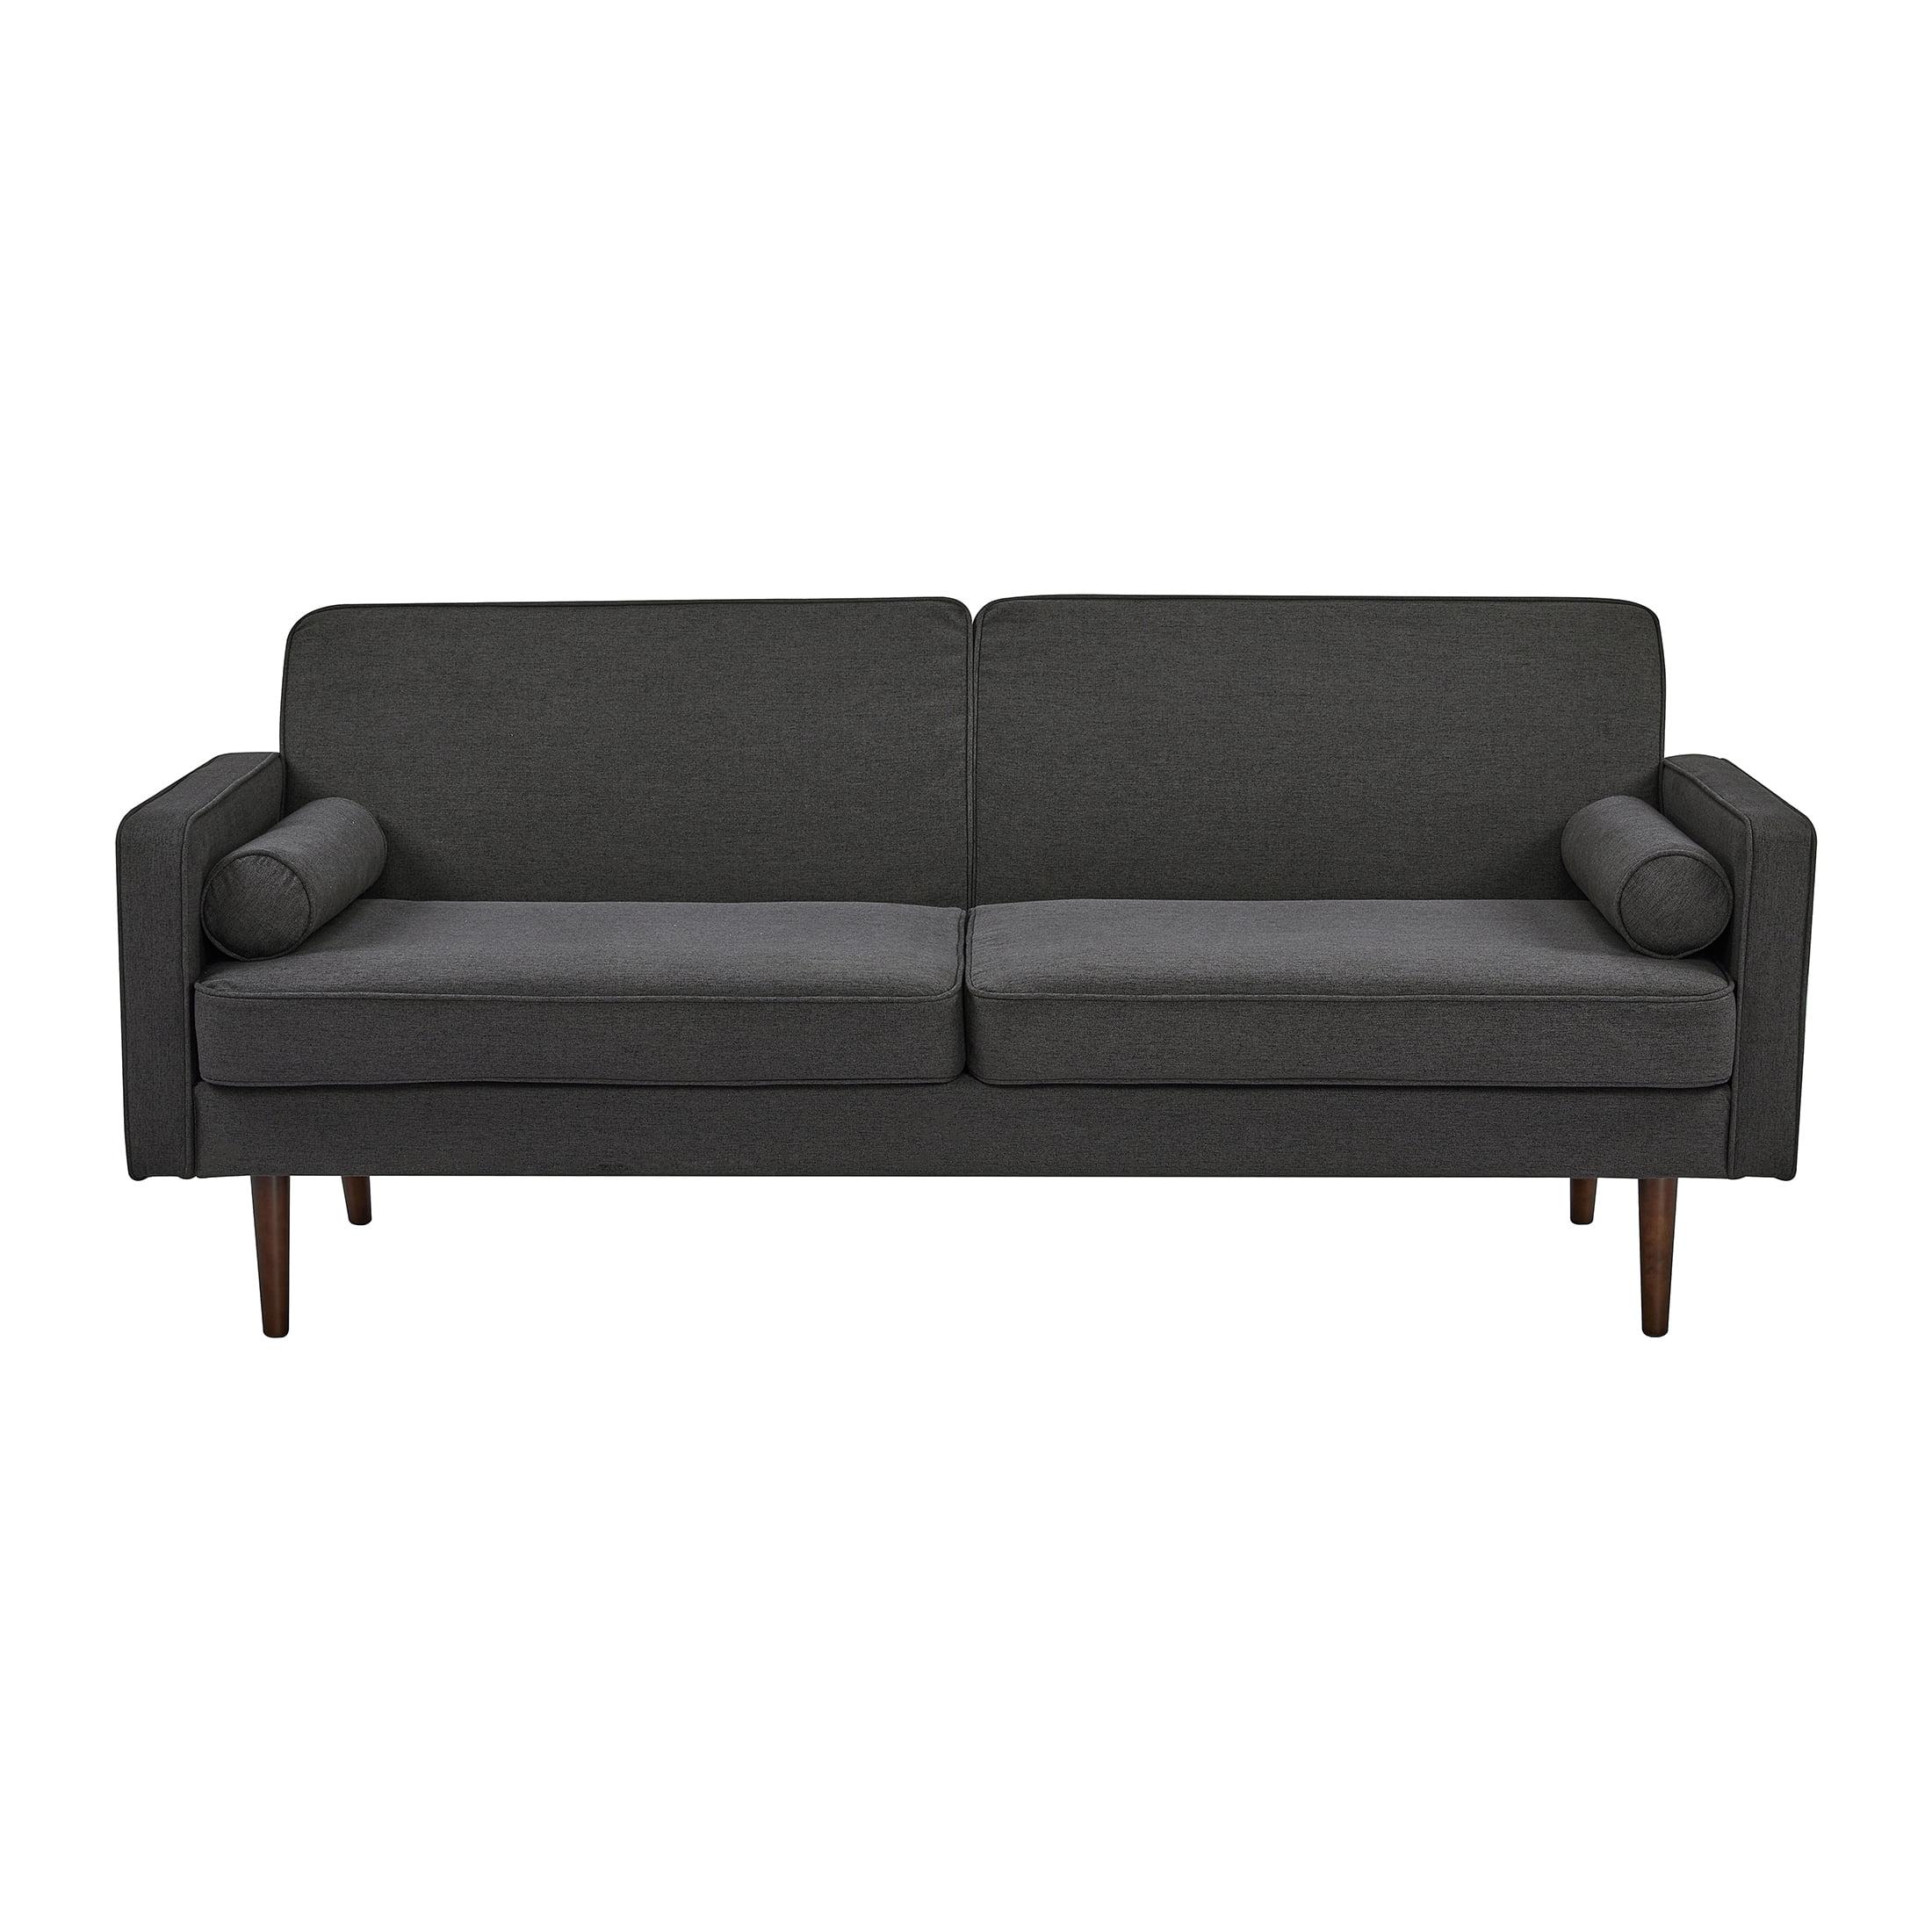 Twin Charcoal Fabric Reclining Sleeper Sofa with Removable Cushions